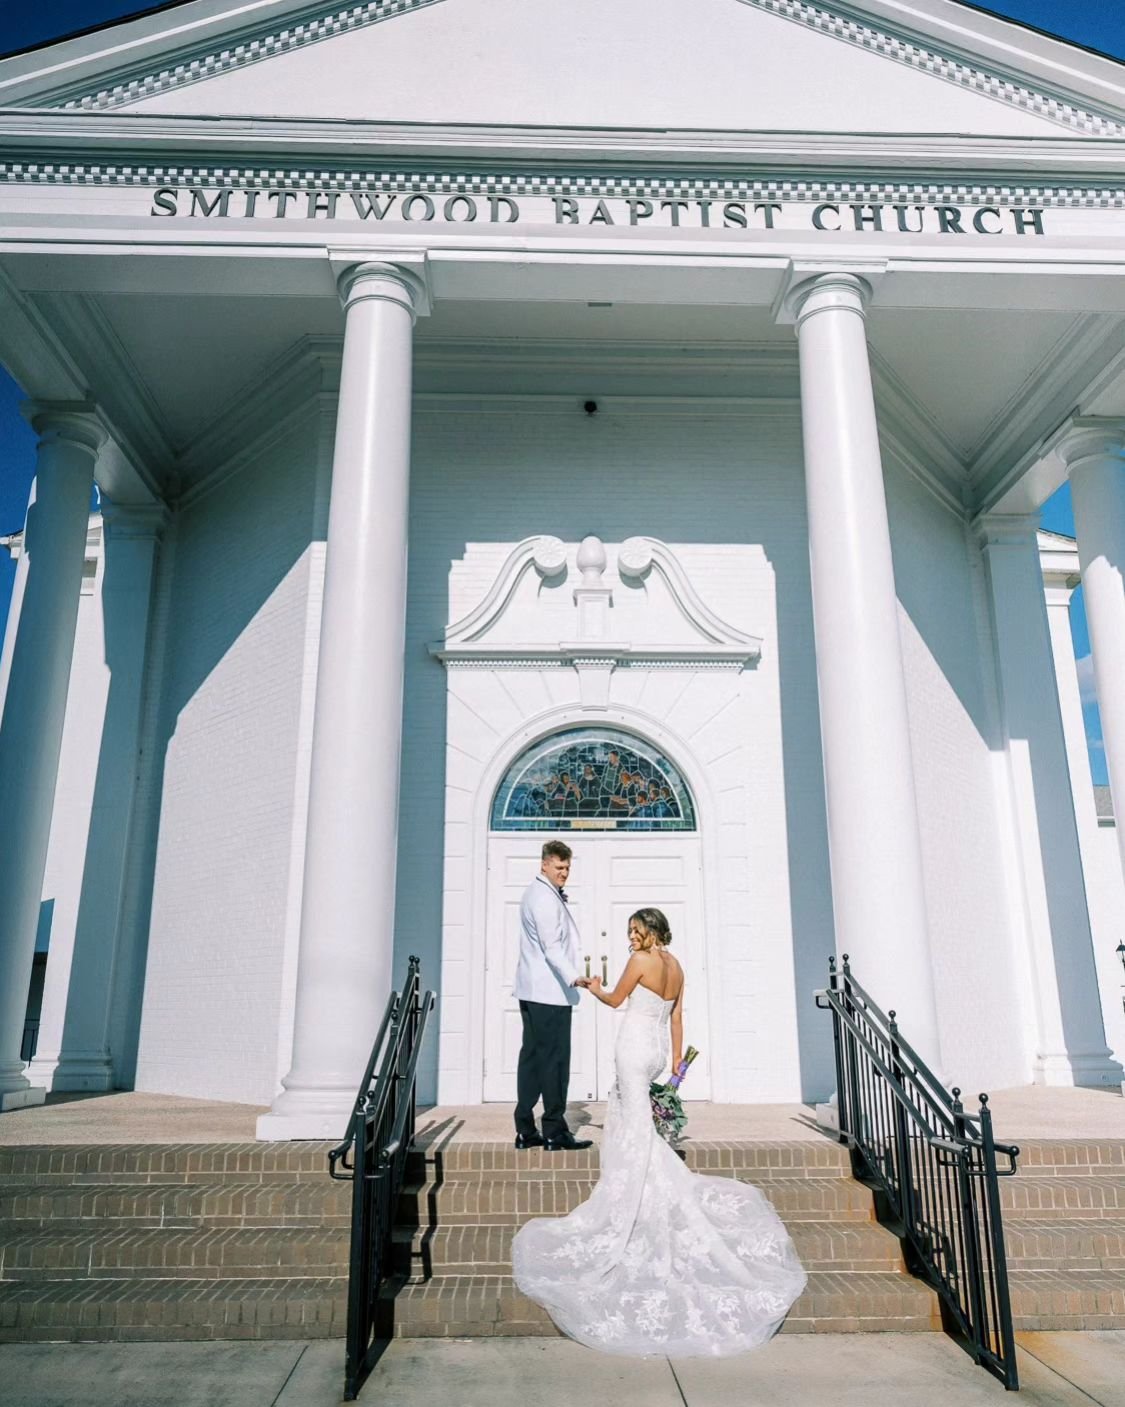 Surrounded by love and timeless elegance, Katie &amp; Isaac said 'I do' in the most beautiful white church ceremony. ✨ From the casual yet sophisticated ambiance to the adorable puppy ring bearer stealing hearts, every moment was pure magic. Here's t